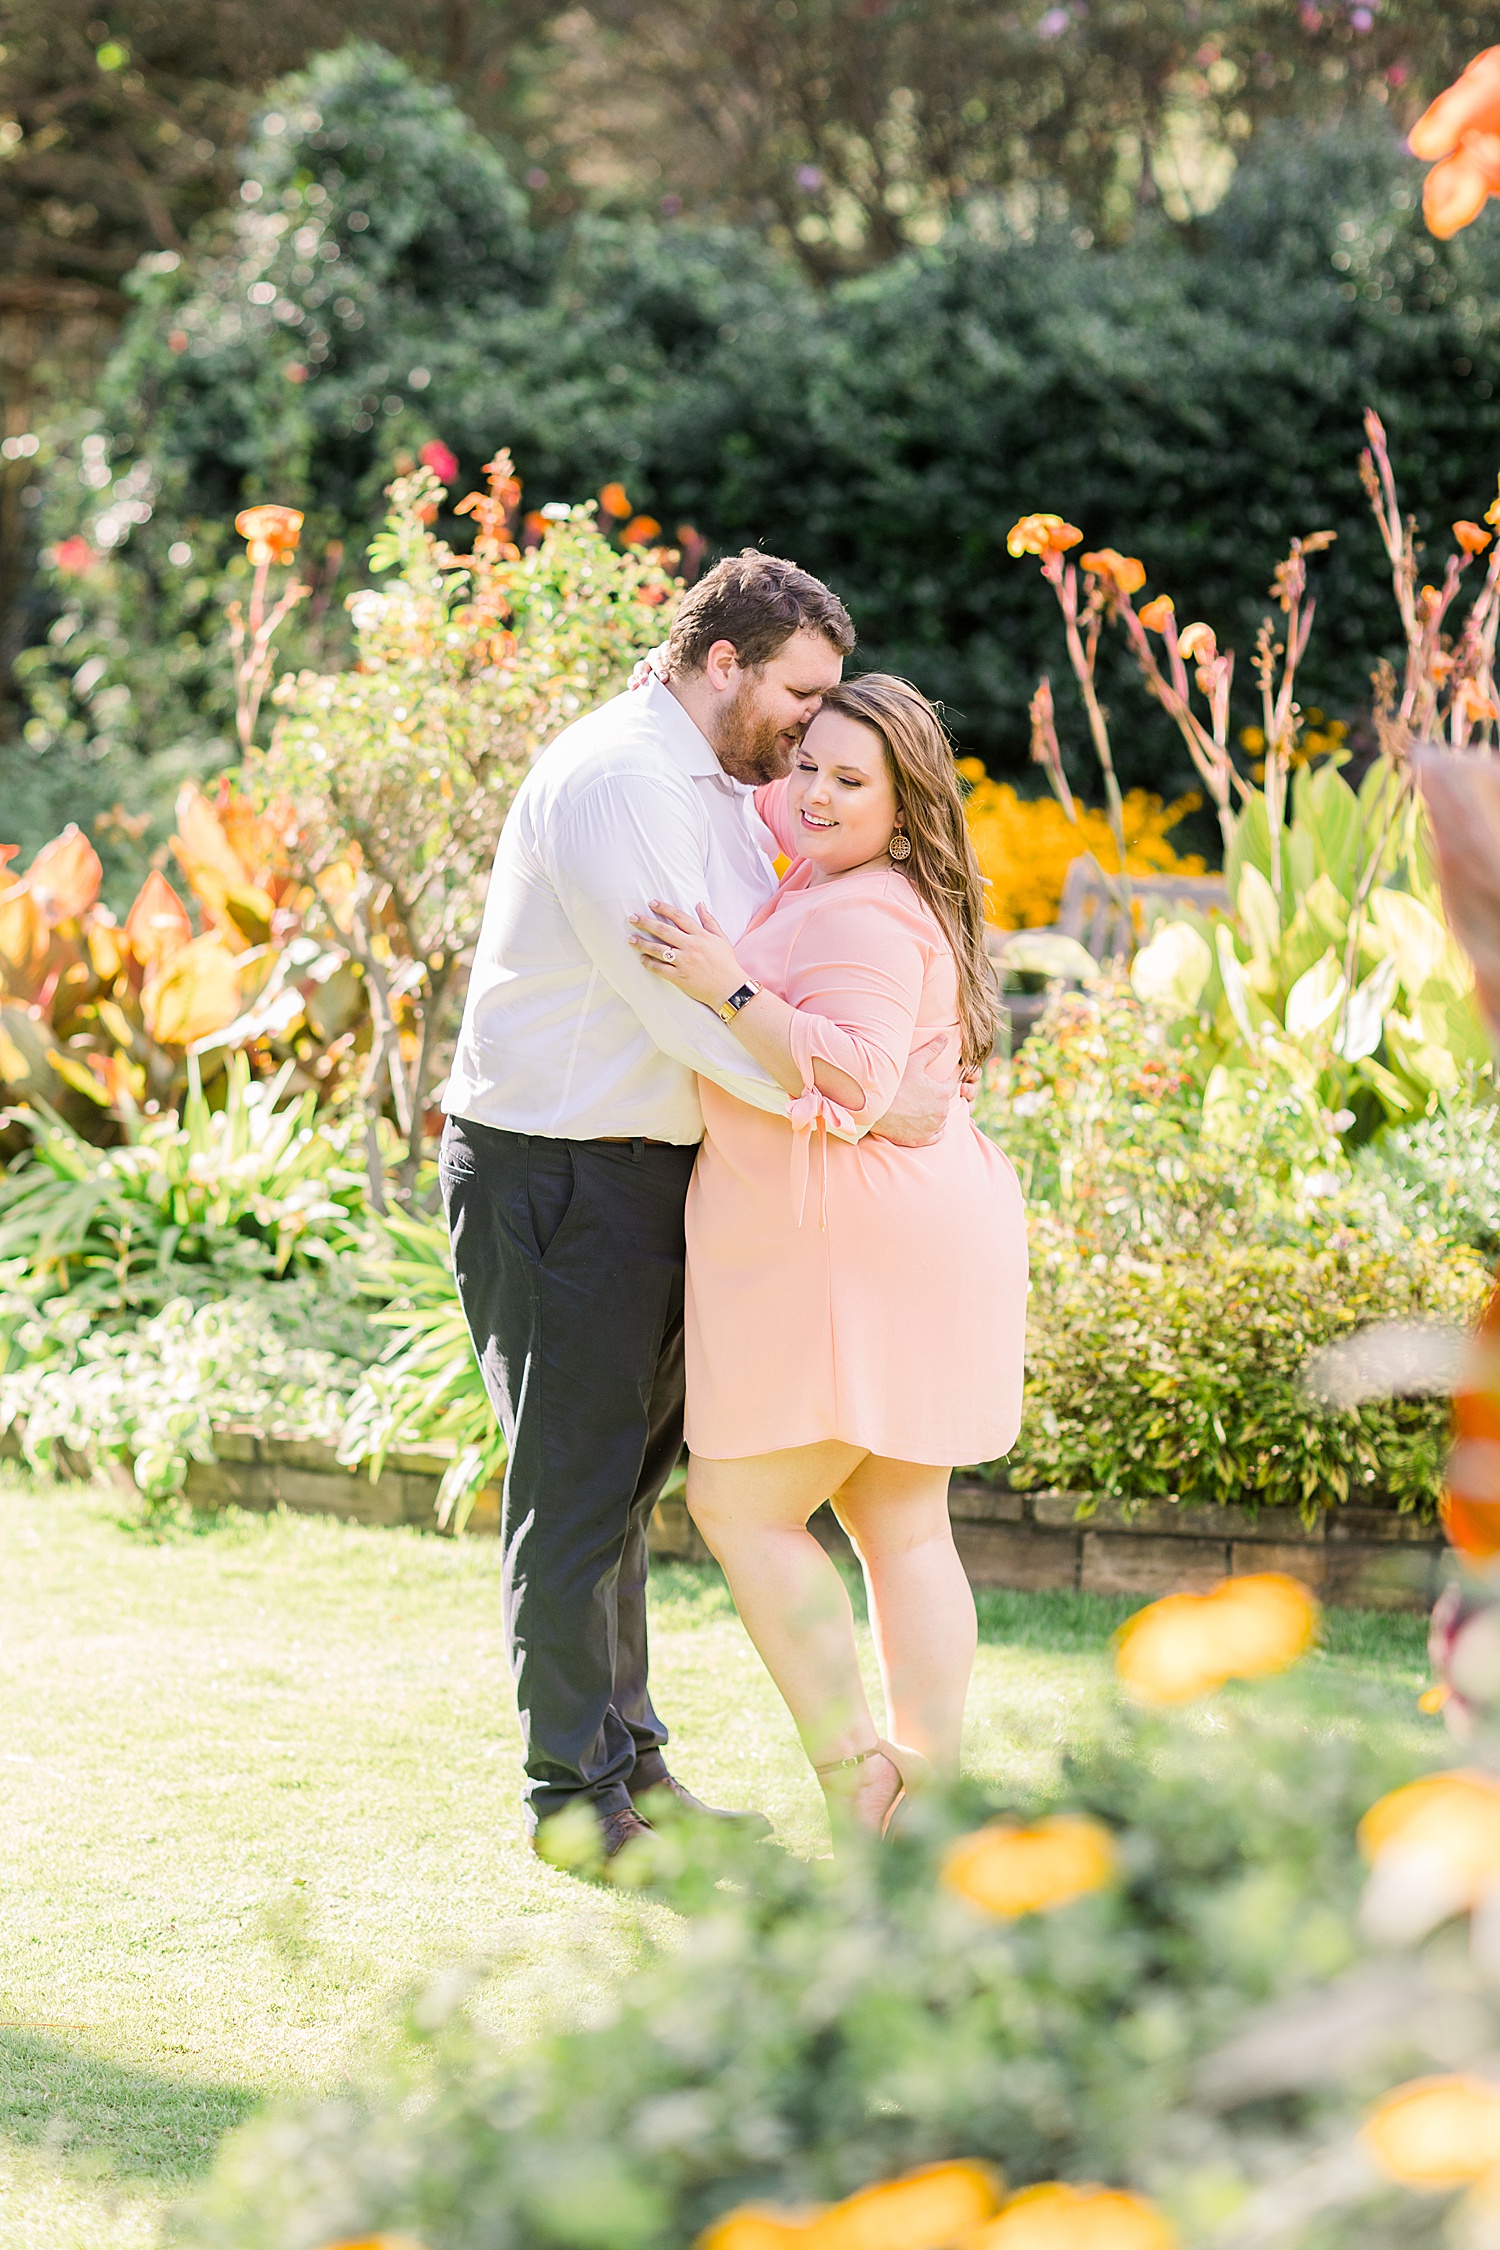 couple lean in together standing in garden of yellow flowers in Birmingham Alabama during engagement session